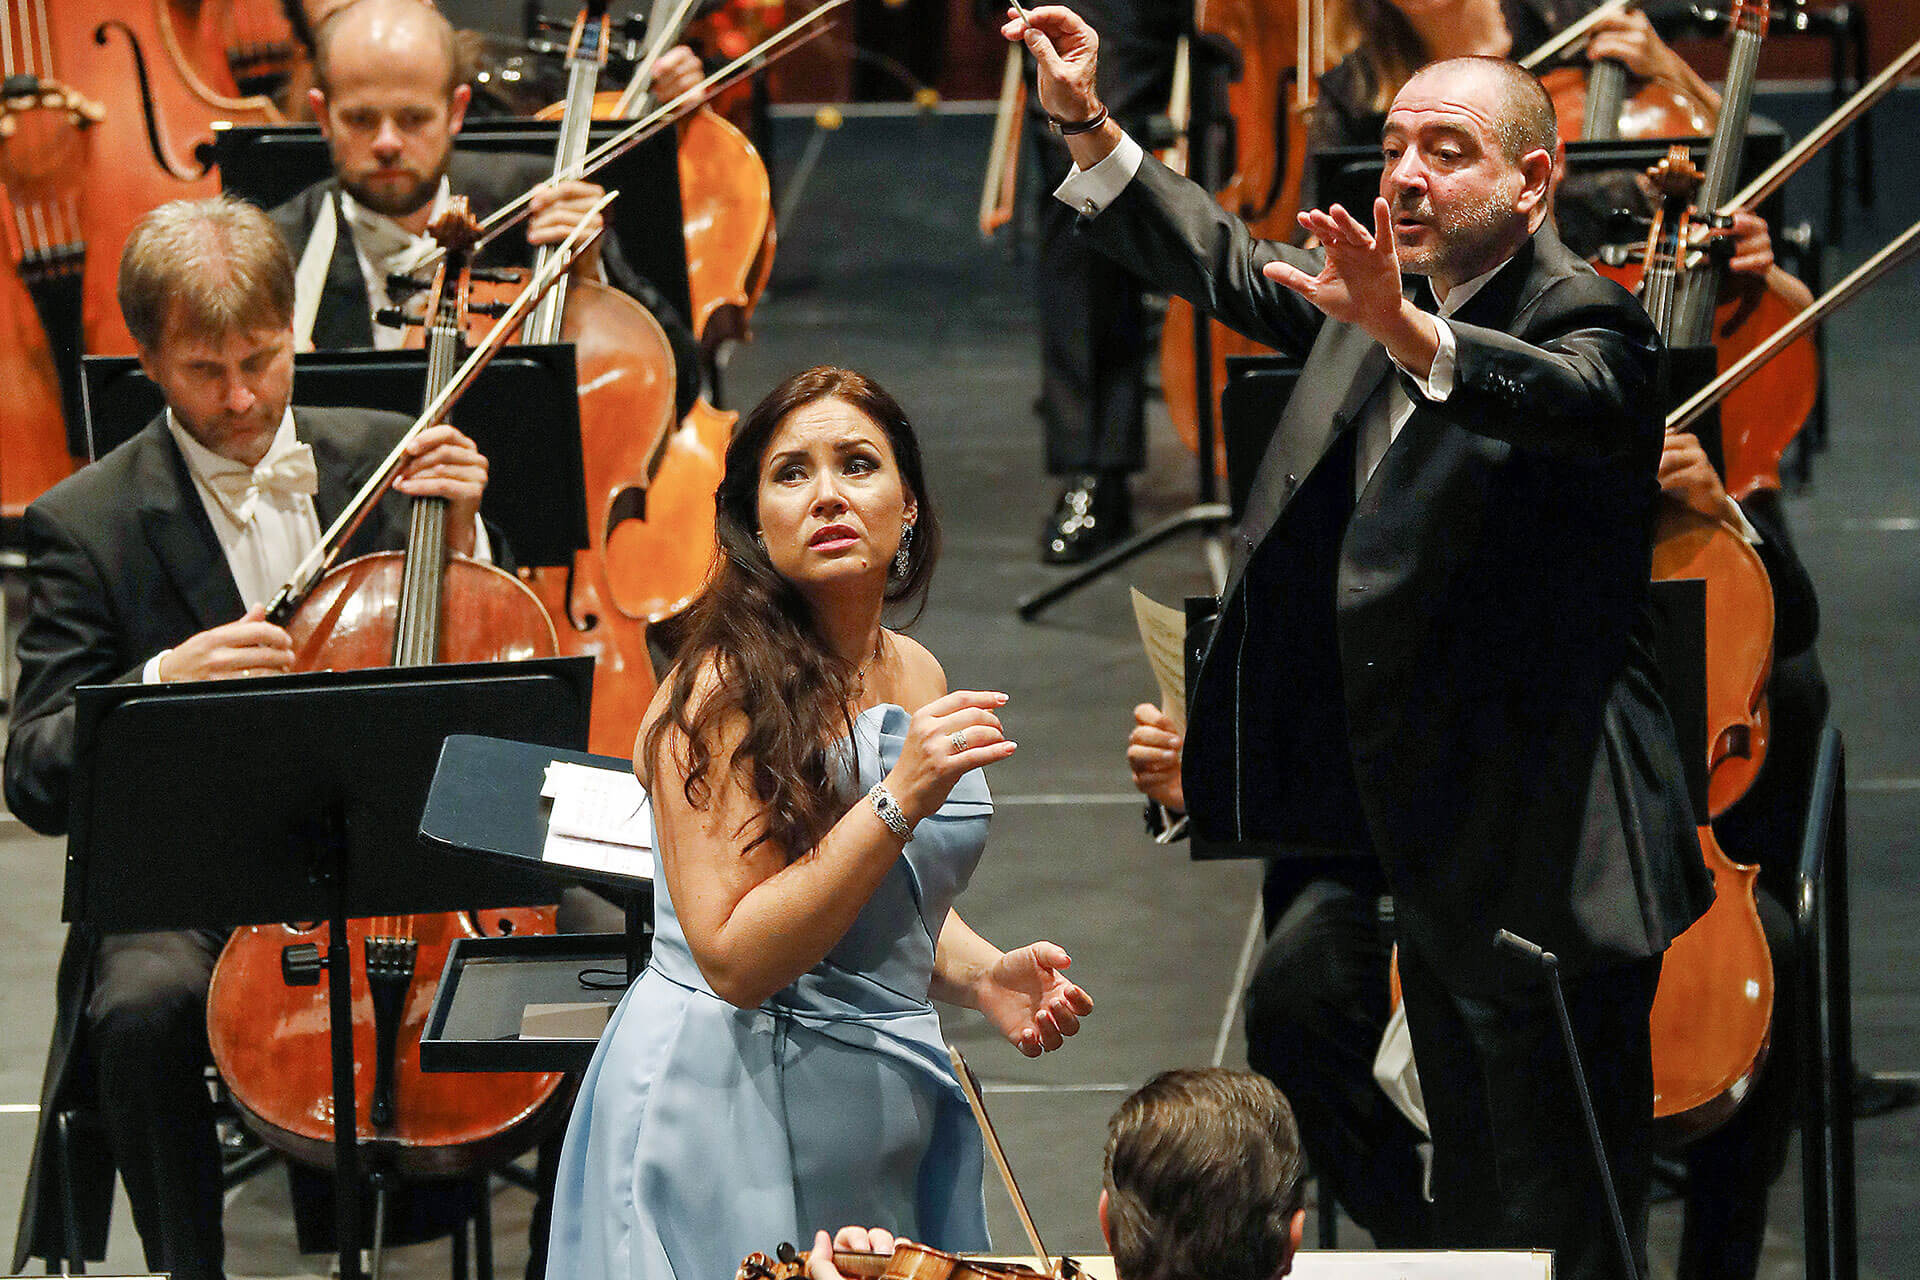 Soprano Sonya Yoncheva unleashed melodious sounds through the Great Hall in her performance alongside Würth Philharmoniker to open the classical music season at Carmen Würth Forum on 3 October 2020.